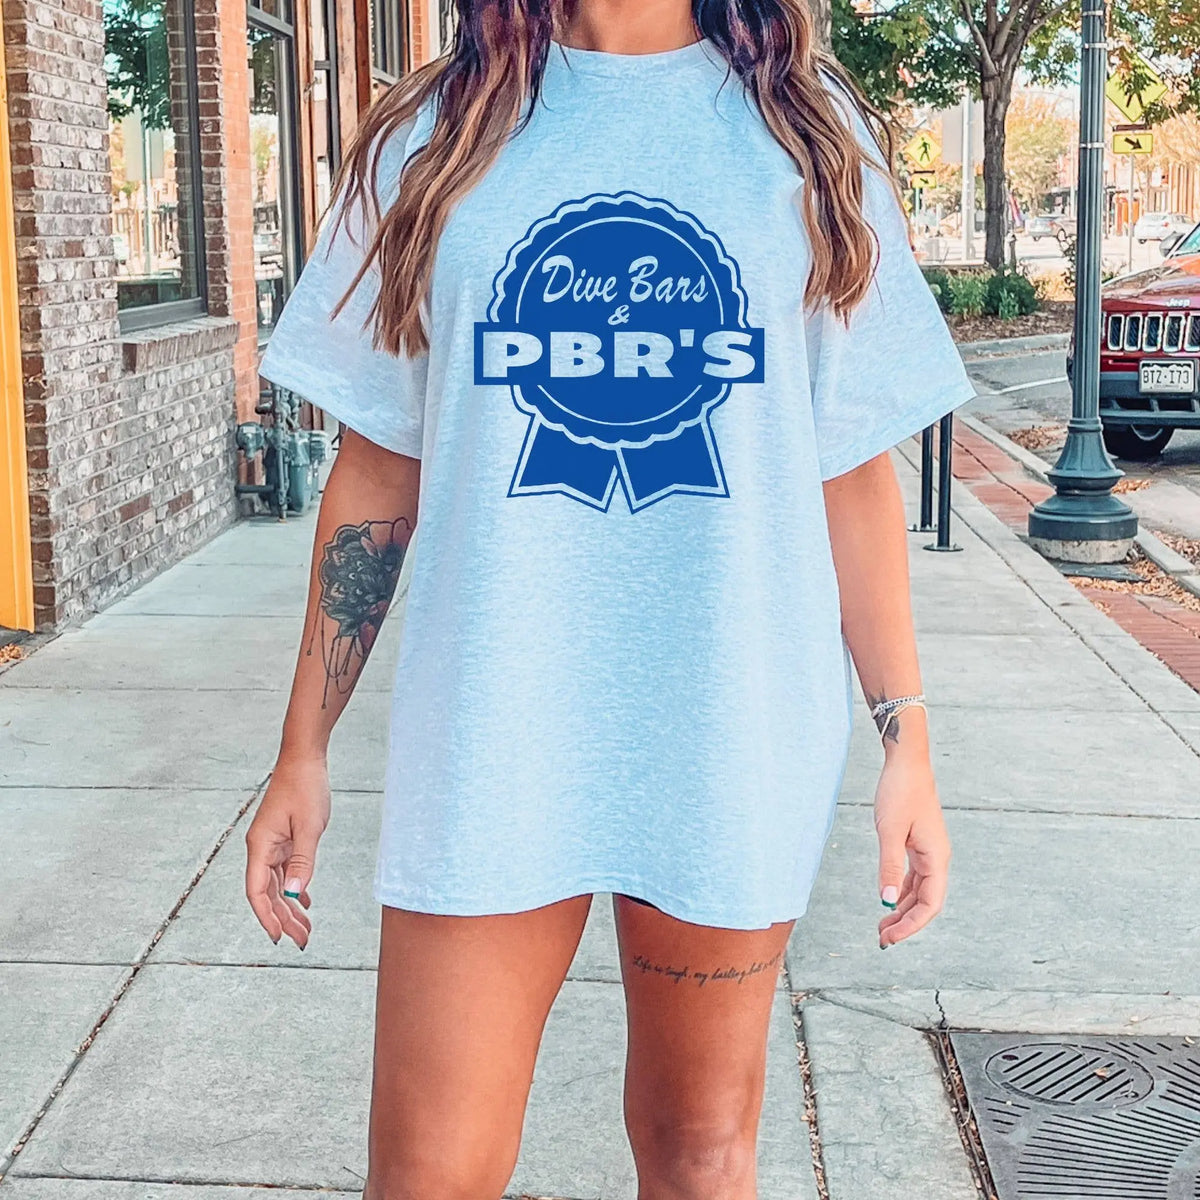 DIVE BARS & PBRS GRAPHIC TEE - UNCOMMON REIGN